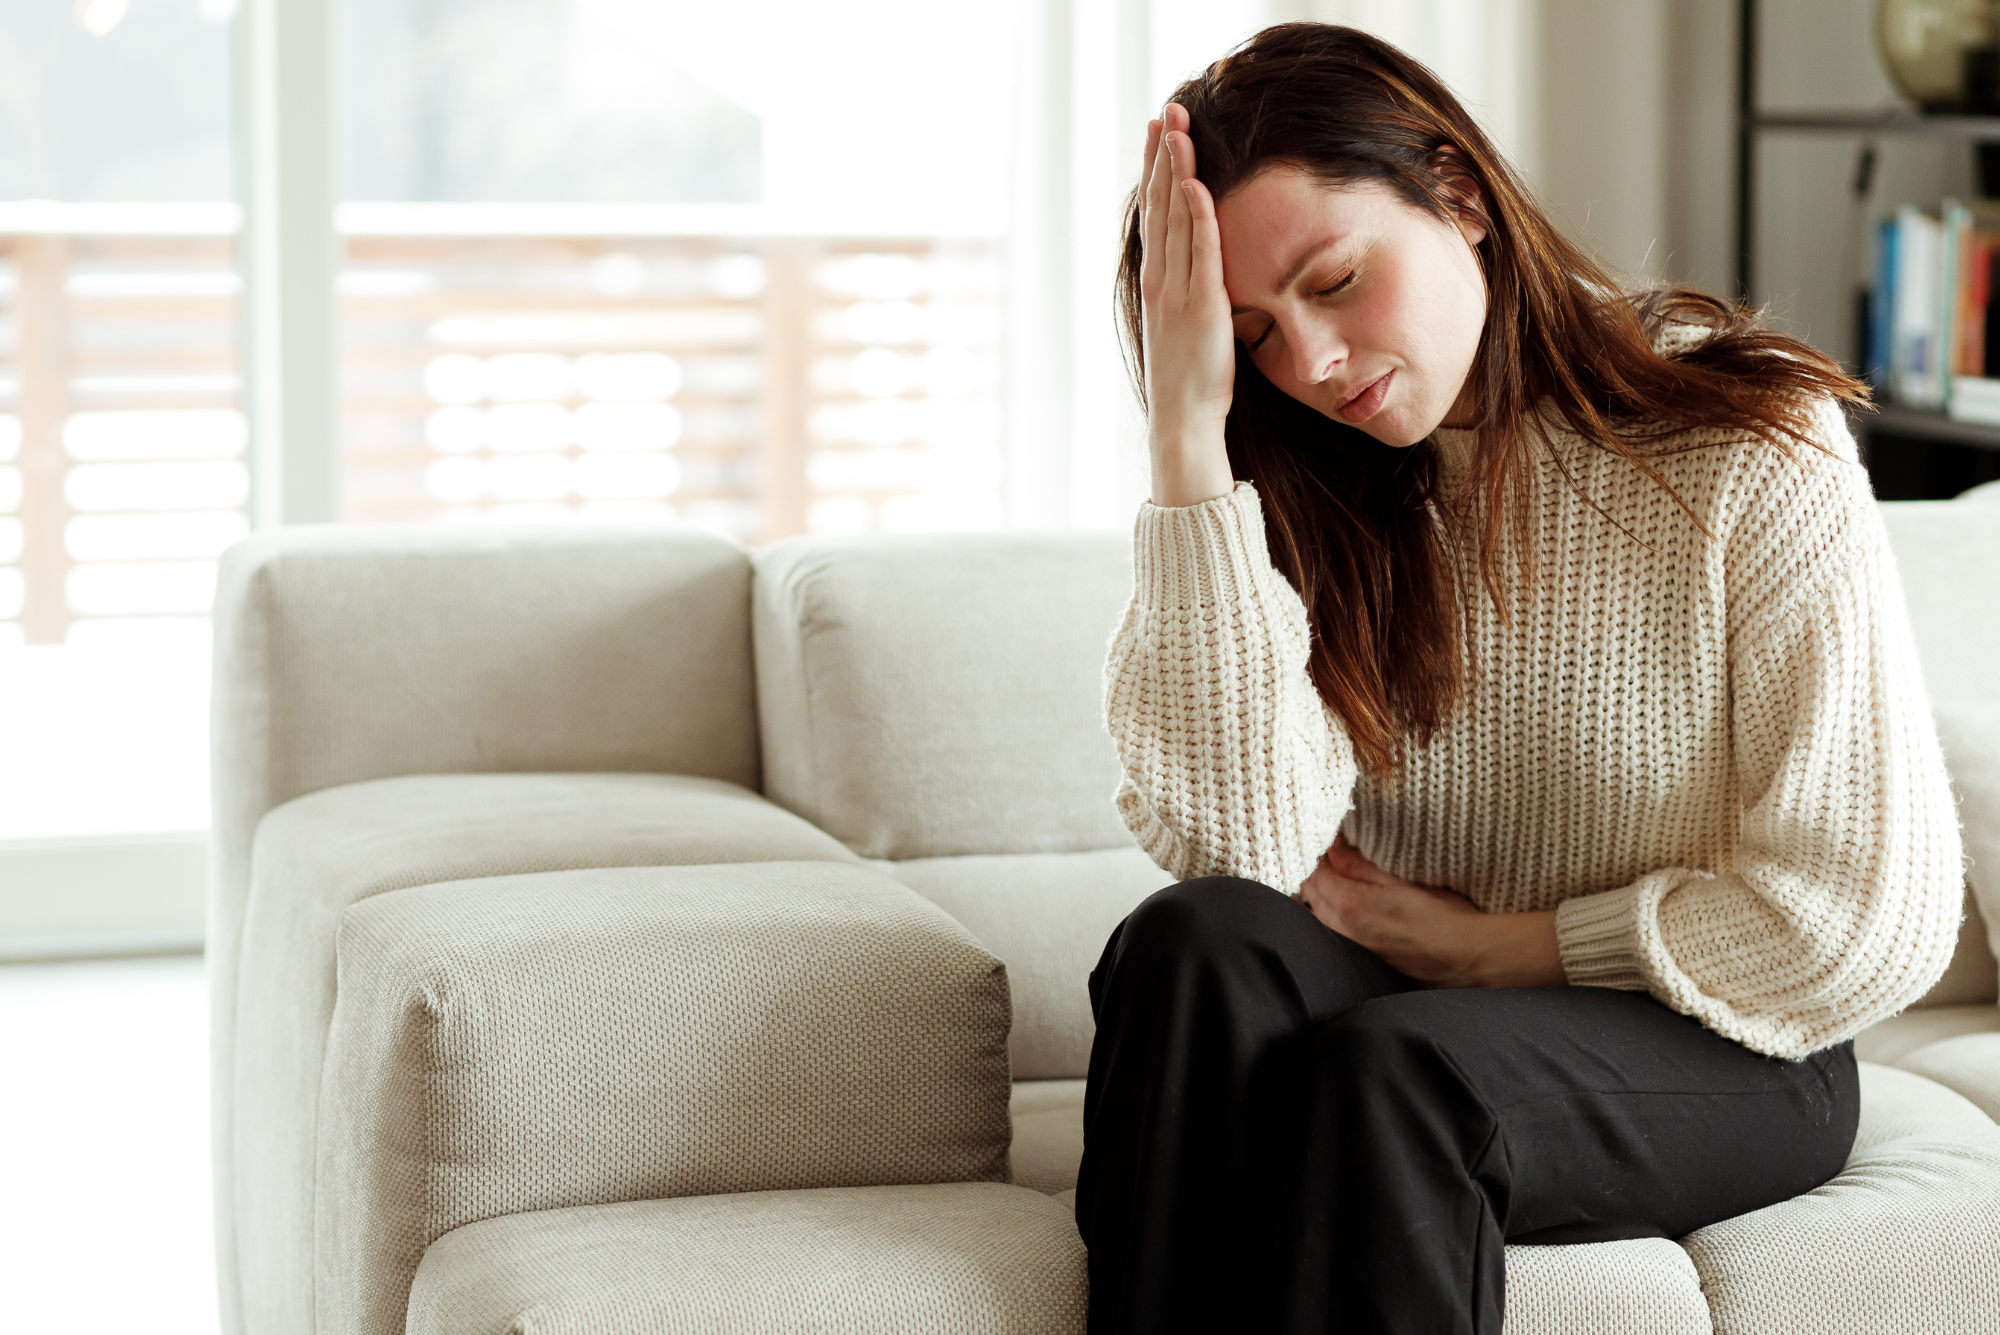 A woman sits on her couch, holding her head in her hands because she has a migraine.